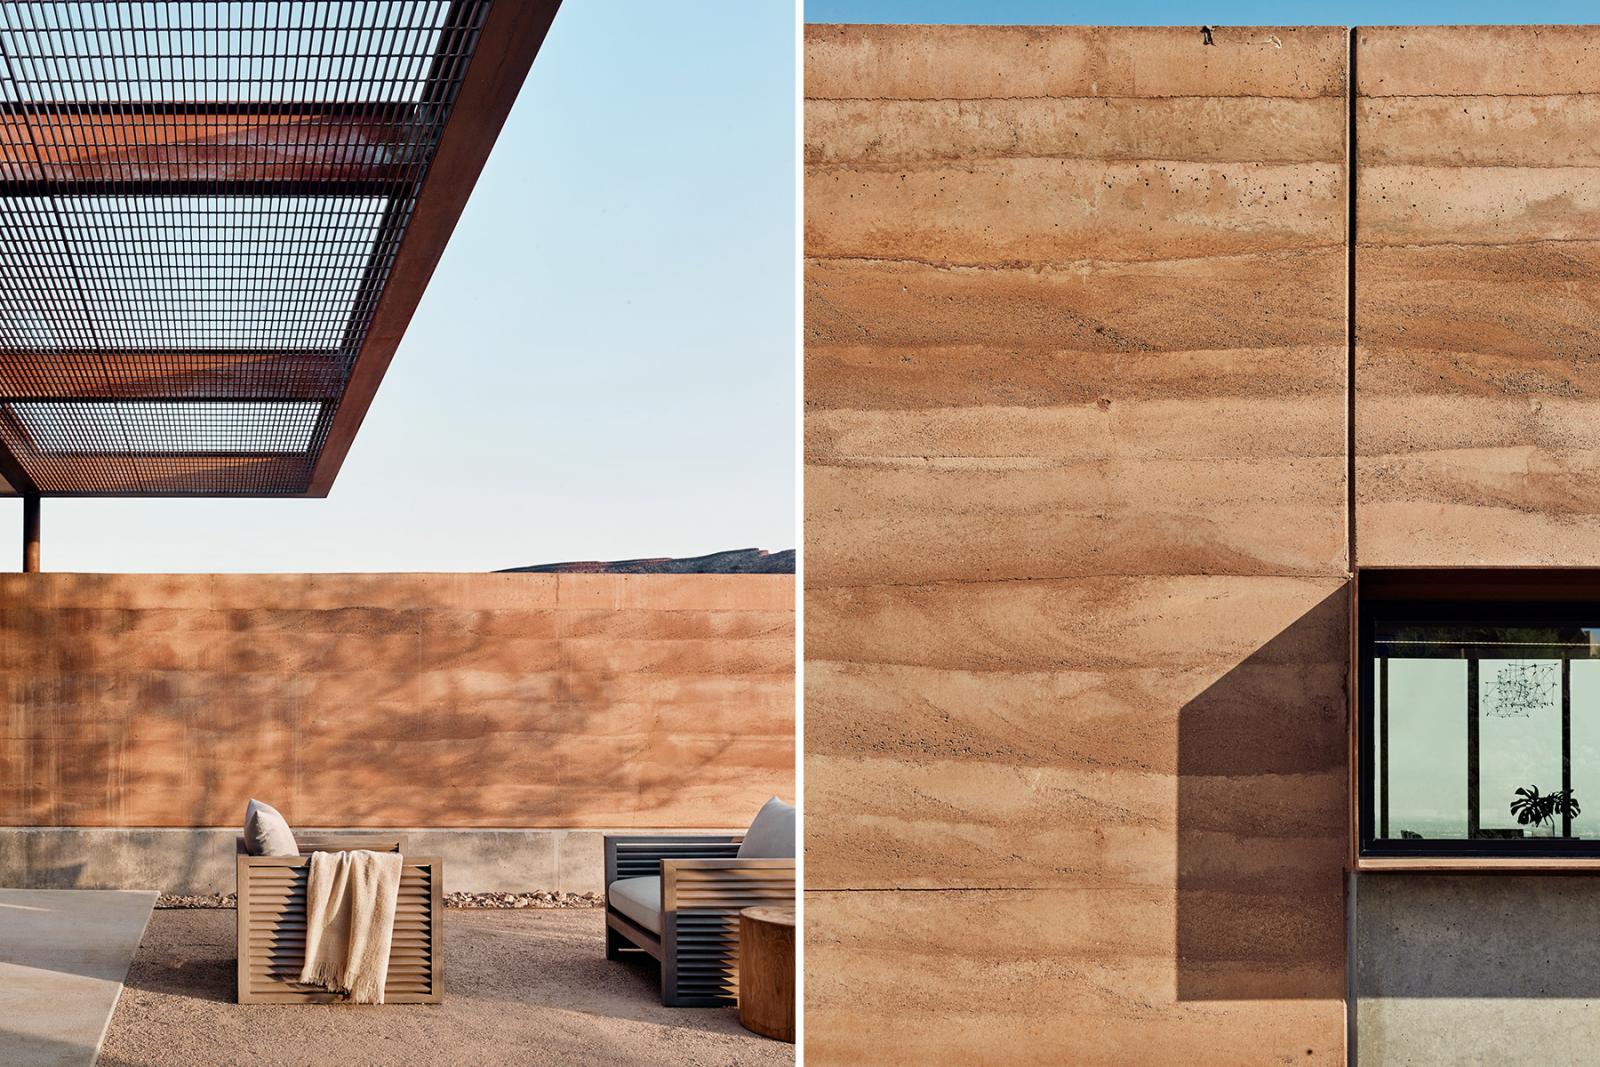 The 2-0” thick rammed earth walls are exposed on both sides and extend from the interior into the landscape, connecting indoor spaces to the patios and courtyard